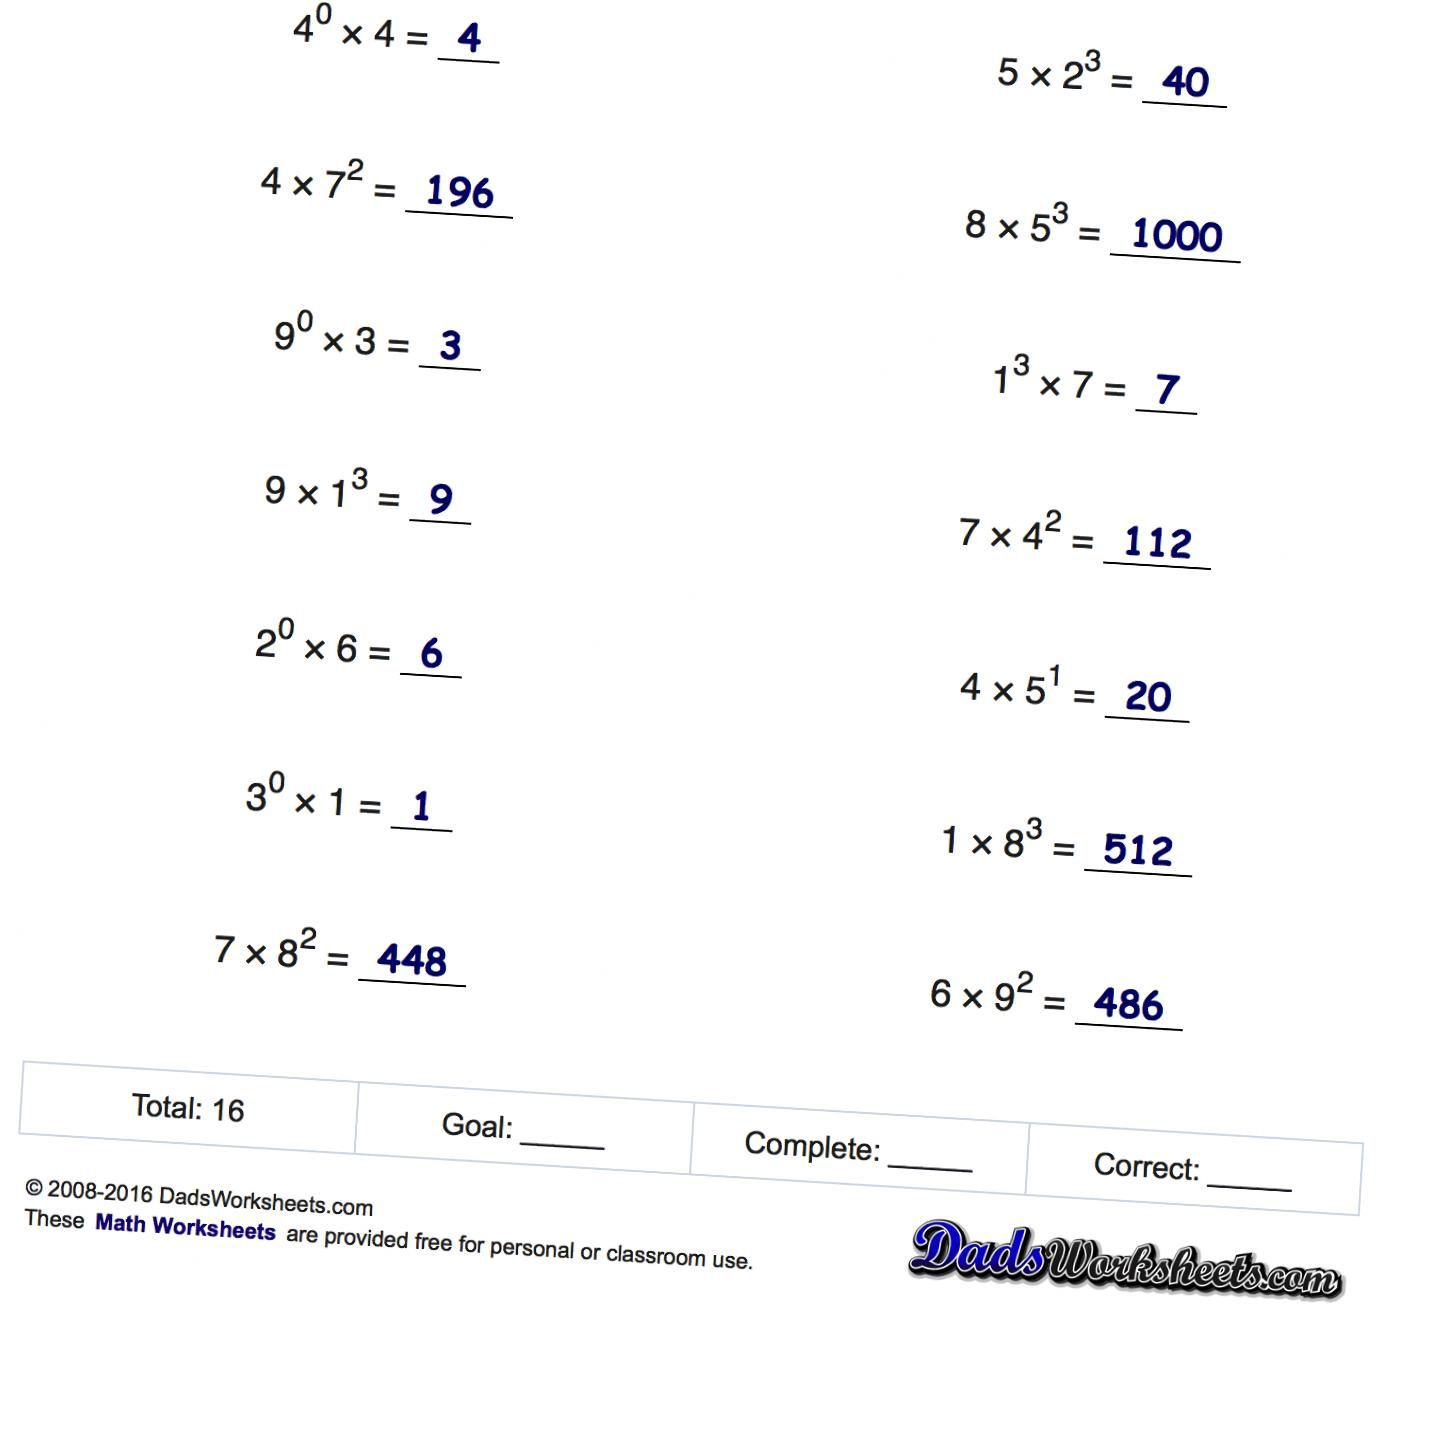 Exponents Worksheets For Computing Powers Of Ten And Scientific | Free Printable Exponent Worksheets